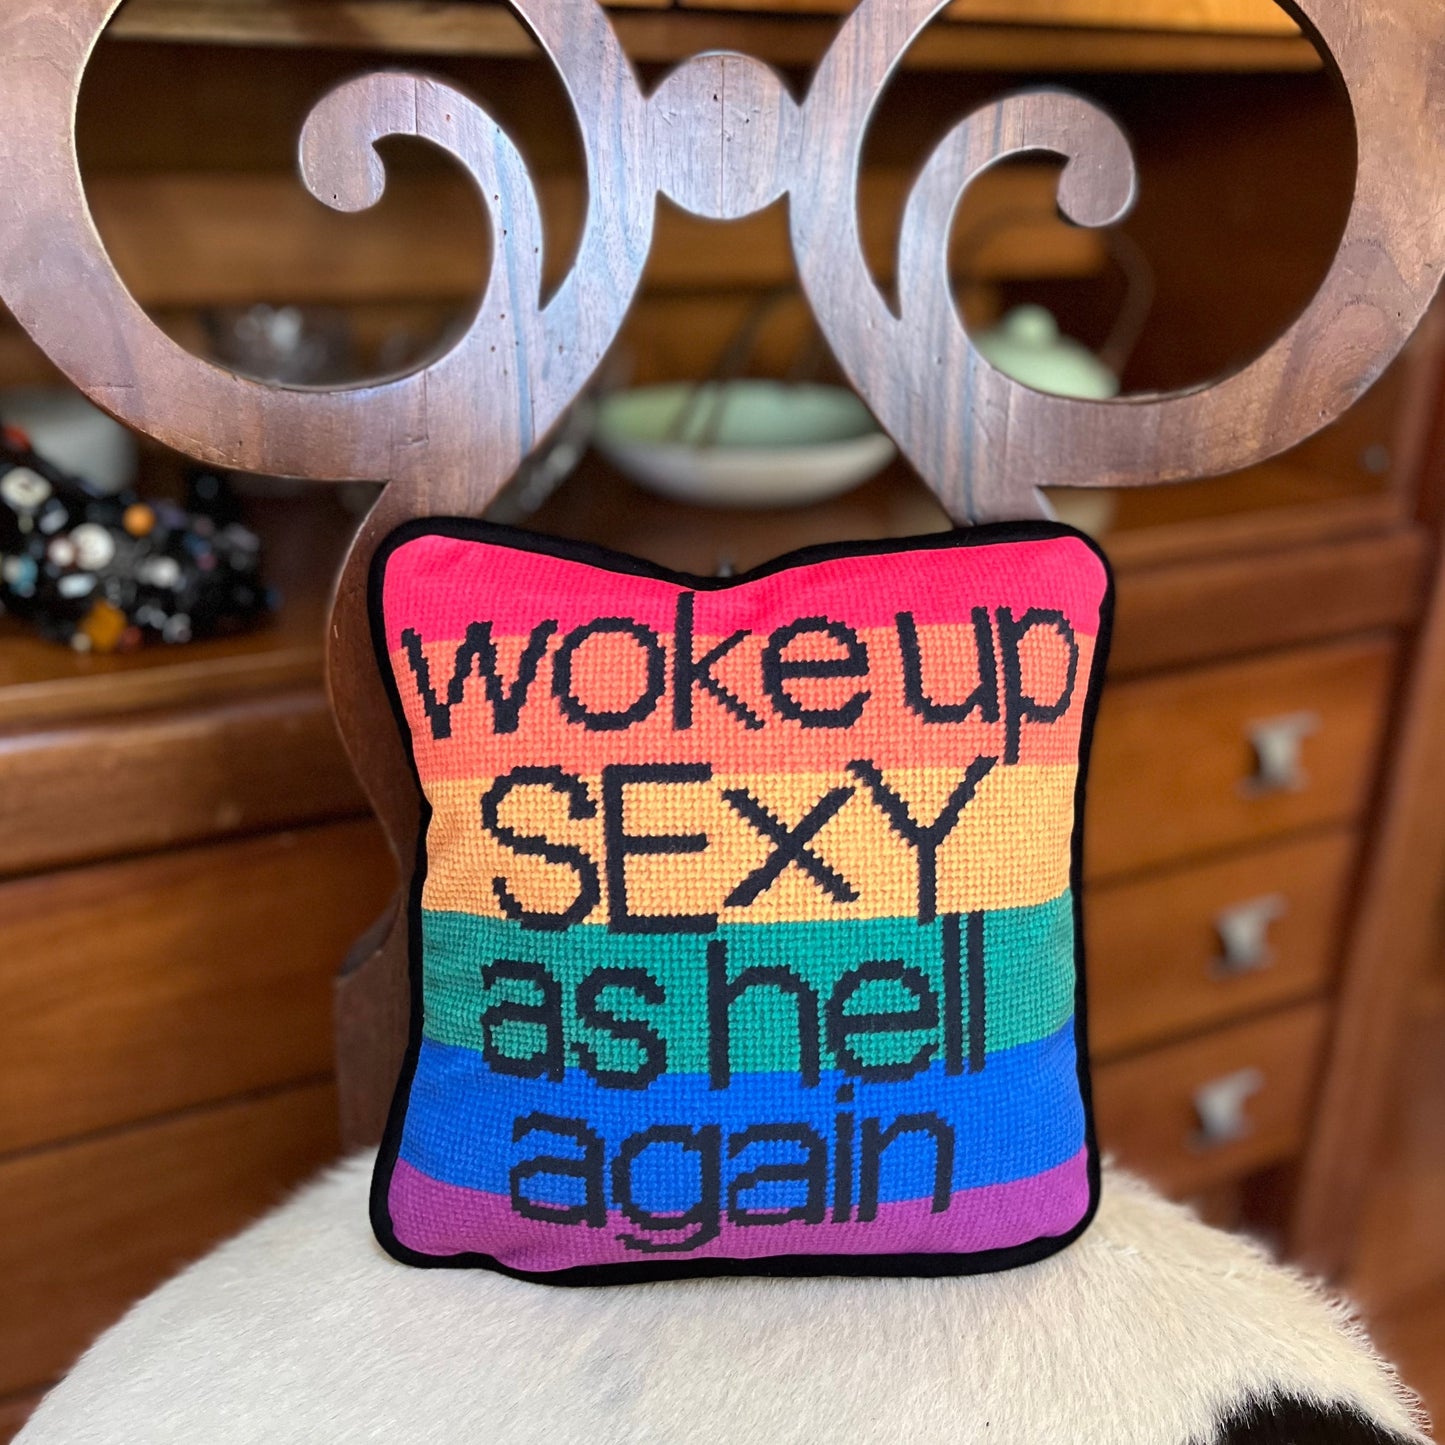 black text with woke up sexy as hell again centered on pillow on rainbow flag background